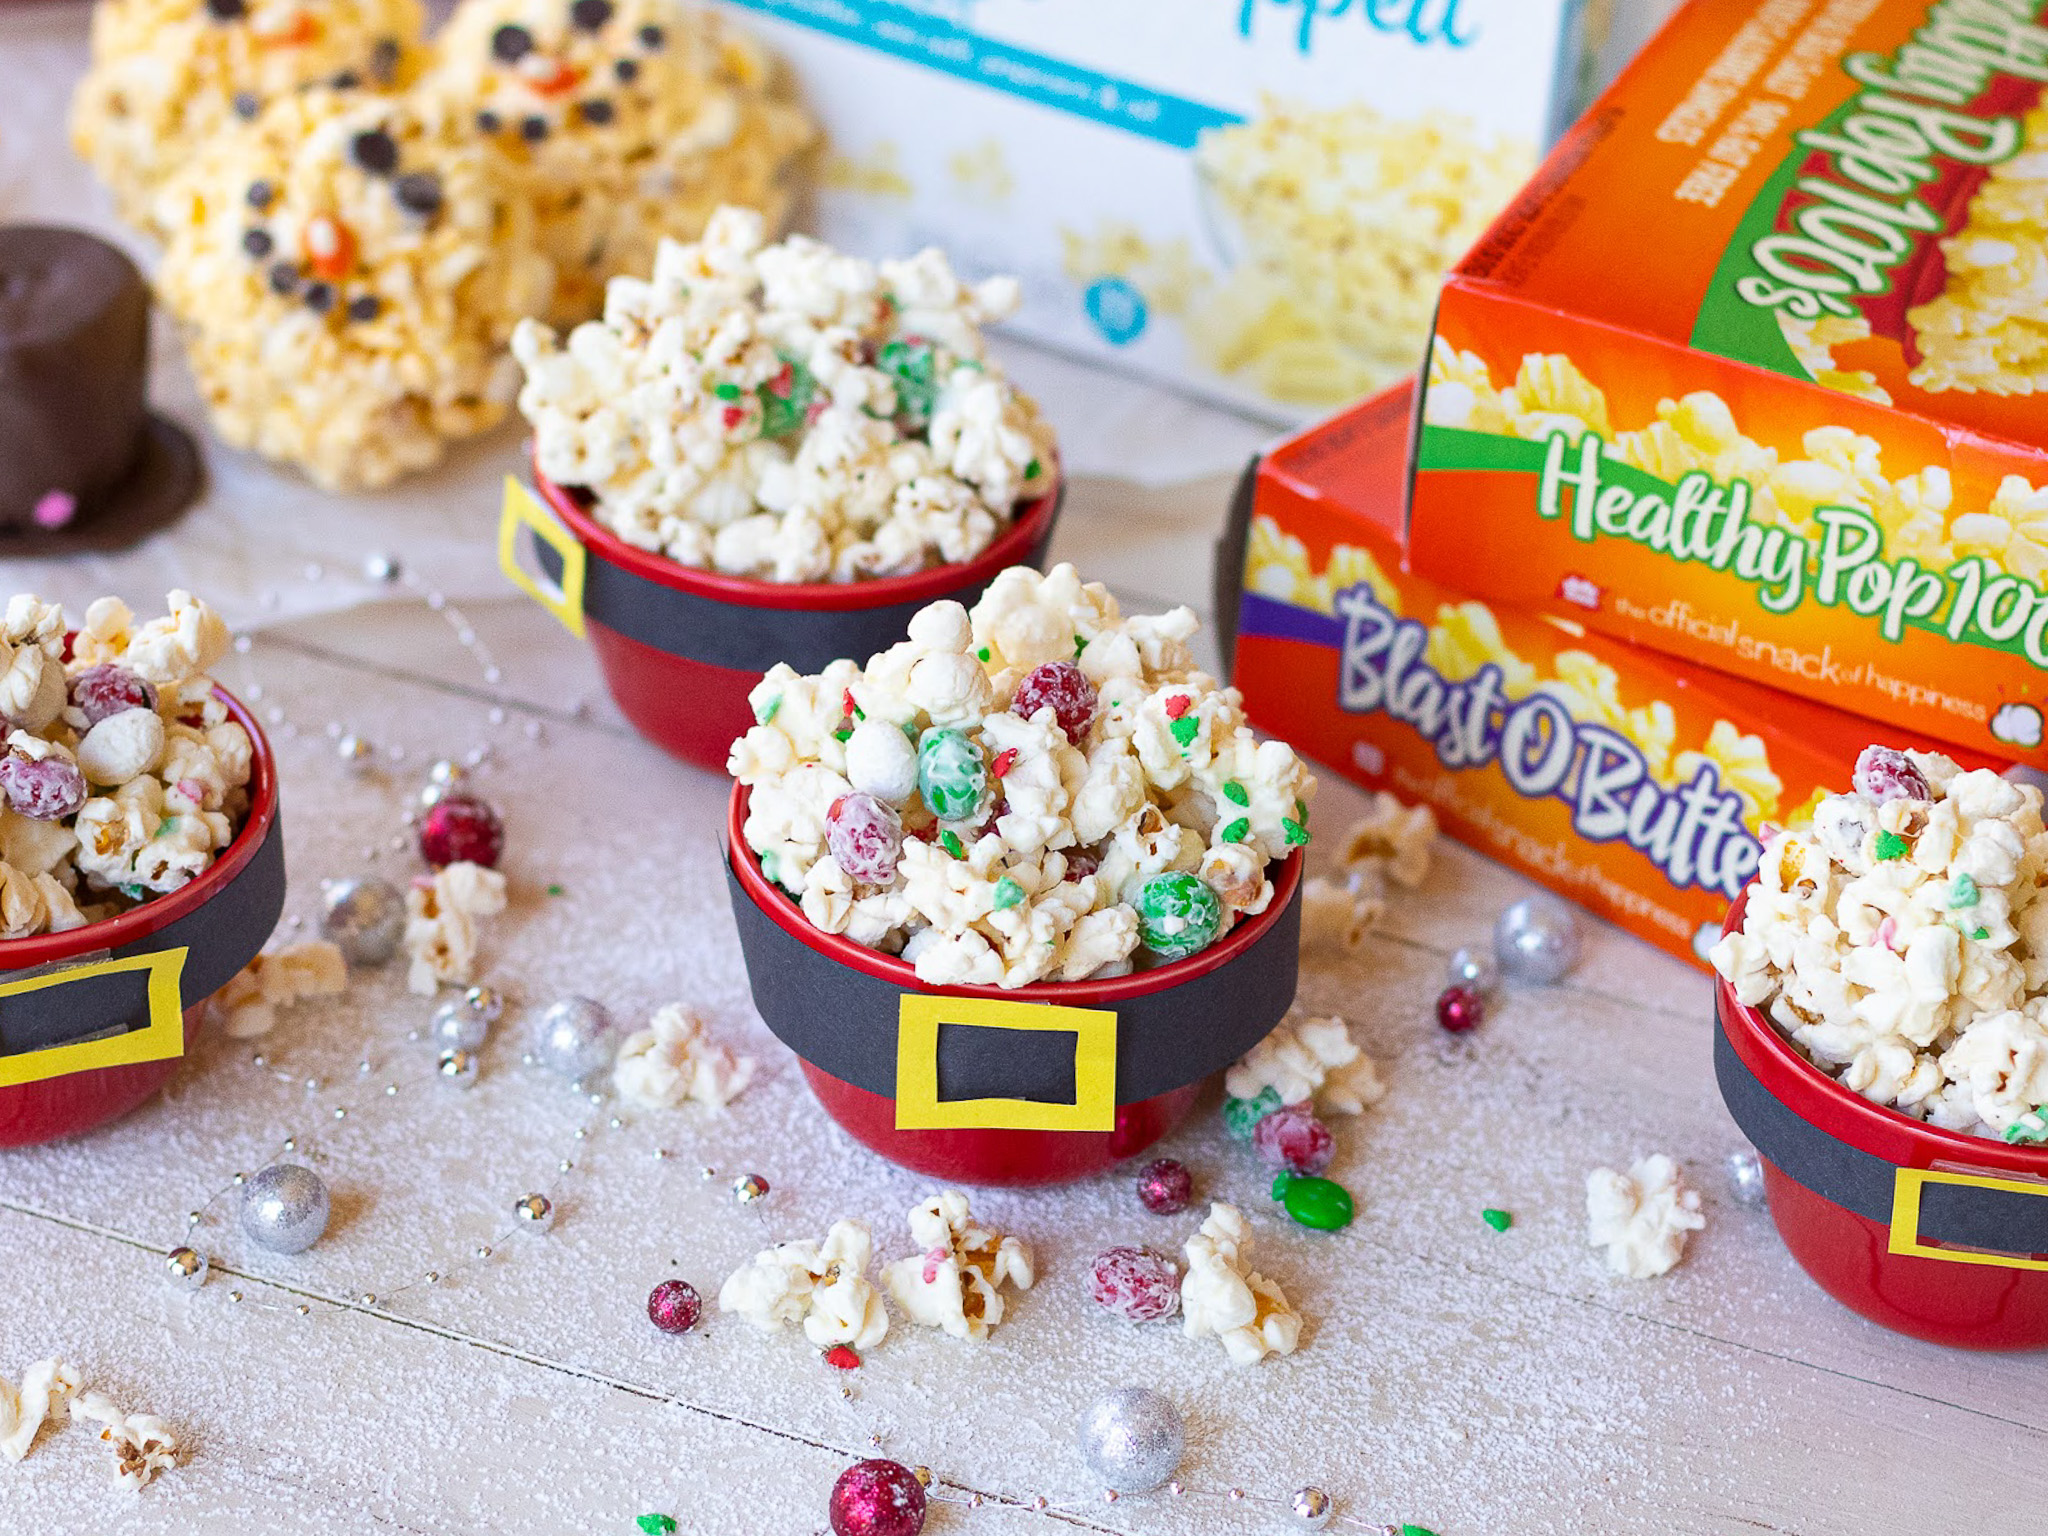 Spread Some Cheer With Santa Crunch Snack Mix Using JOLLY TIME Pop Corn